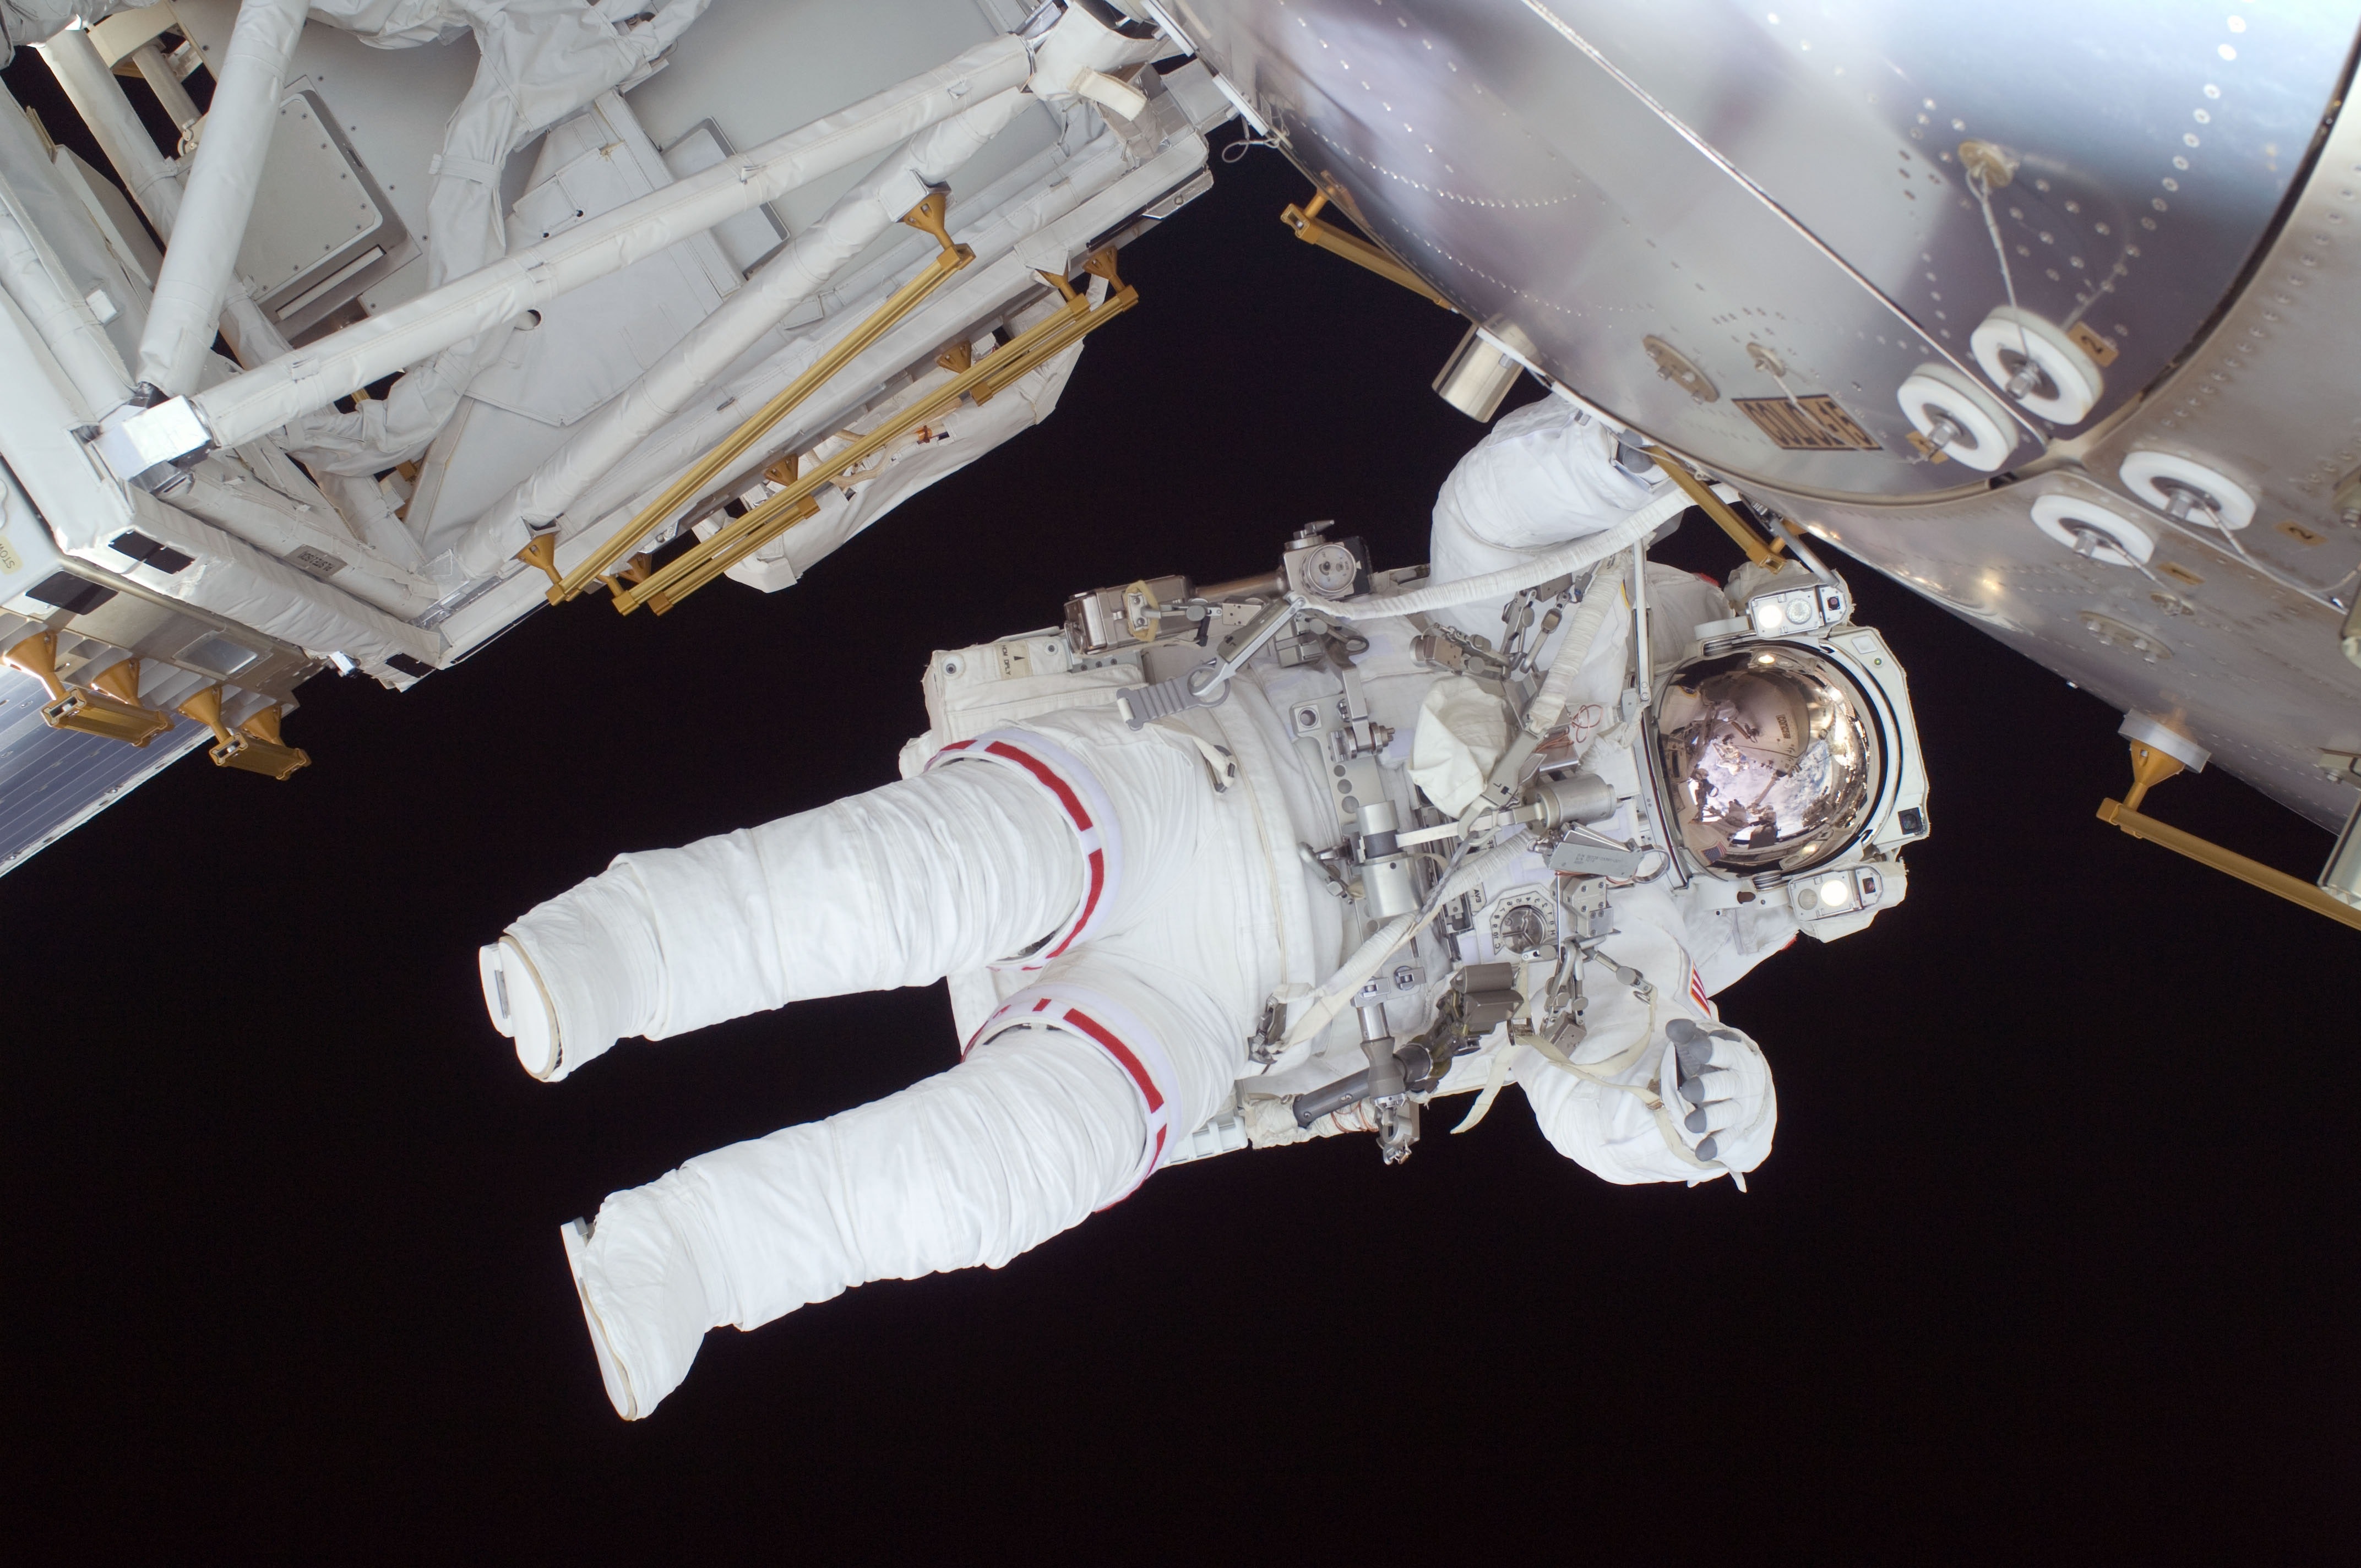 Image shows astronaut floating outside of space shuttle